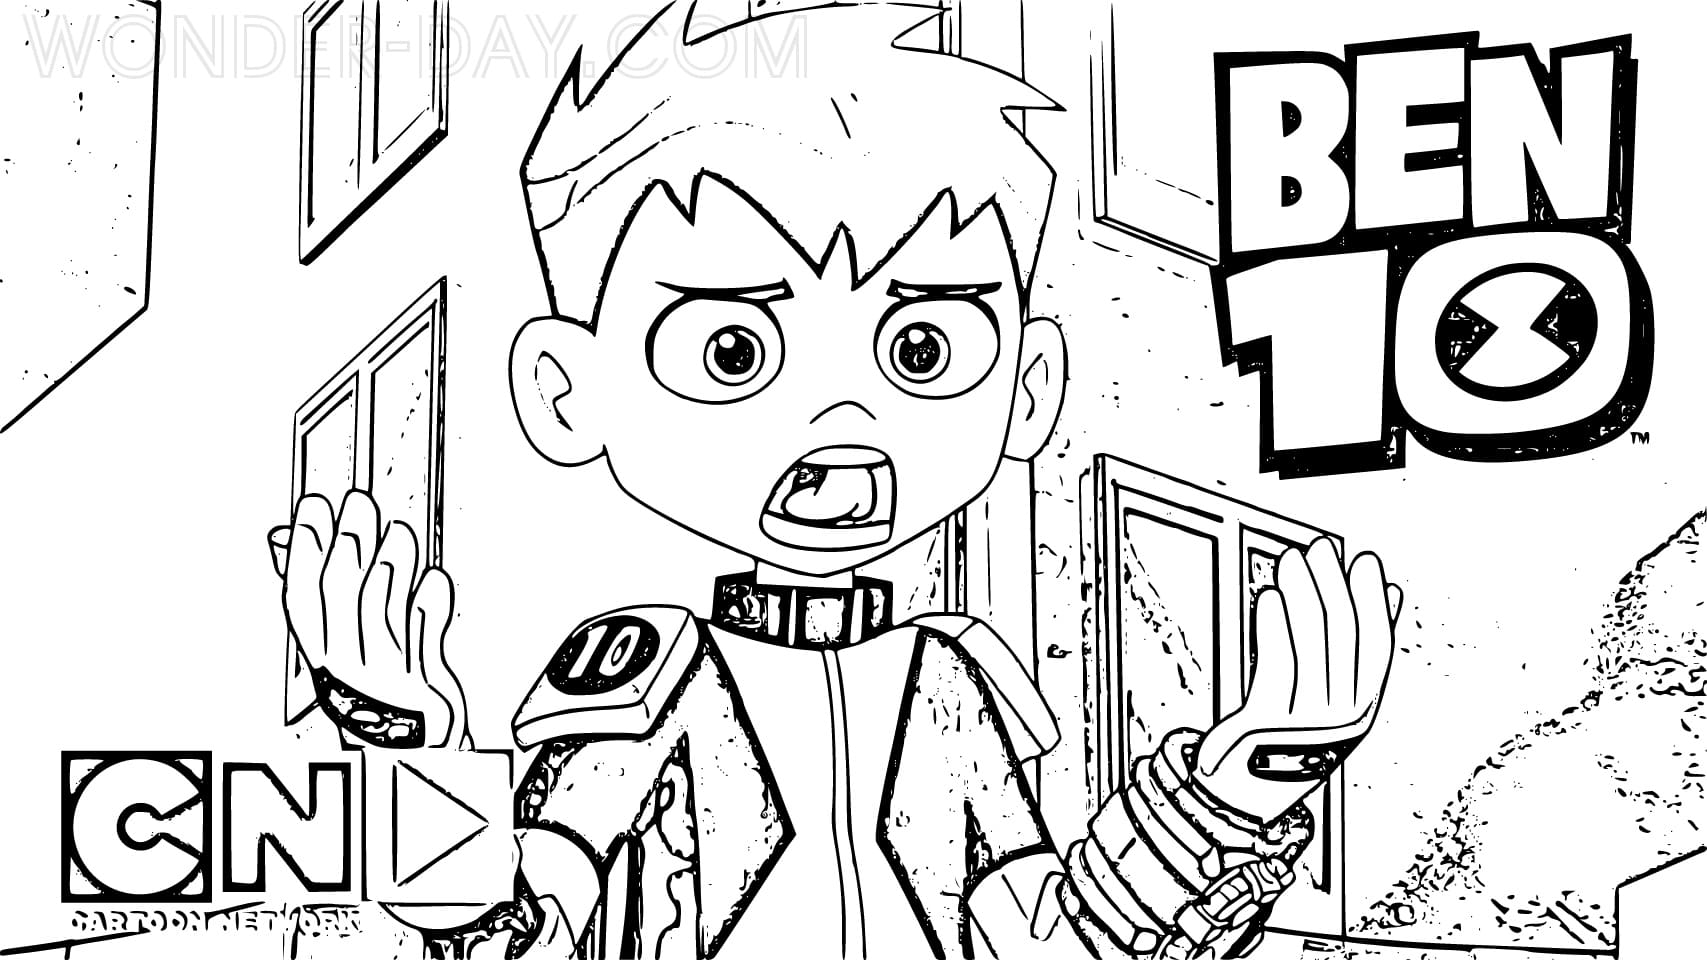 Ben 10 Coloring Pages | Free Coloring Pages for Kids